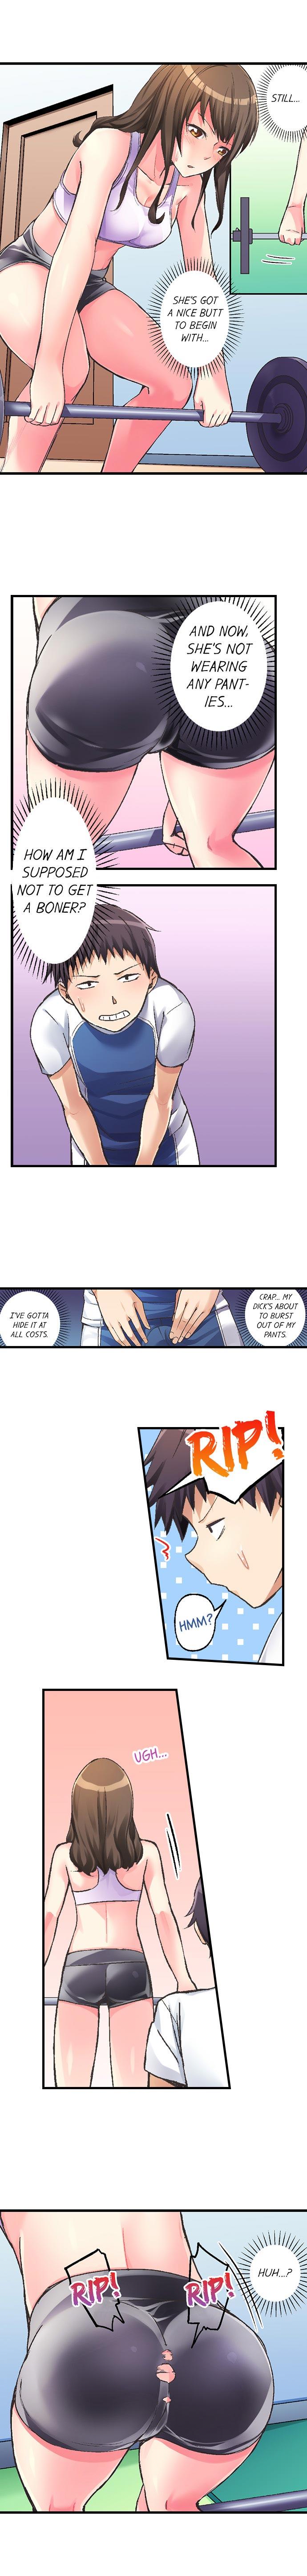 No Panty Booty Workout! Ch. 1 - 6 16